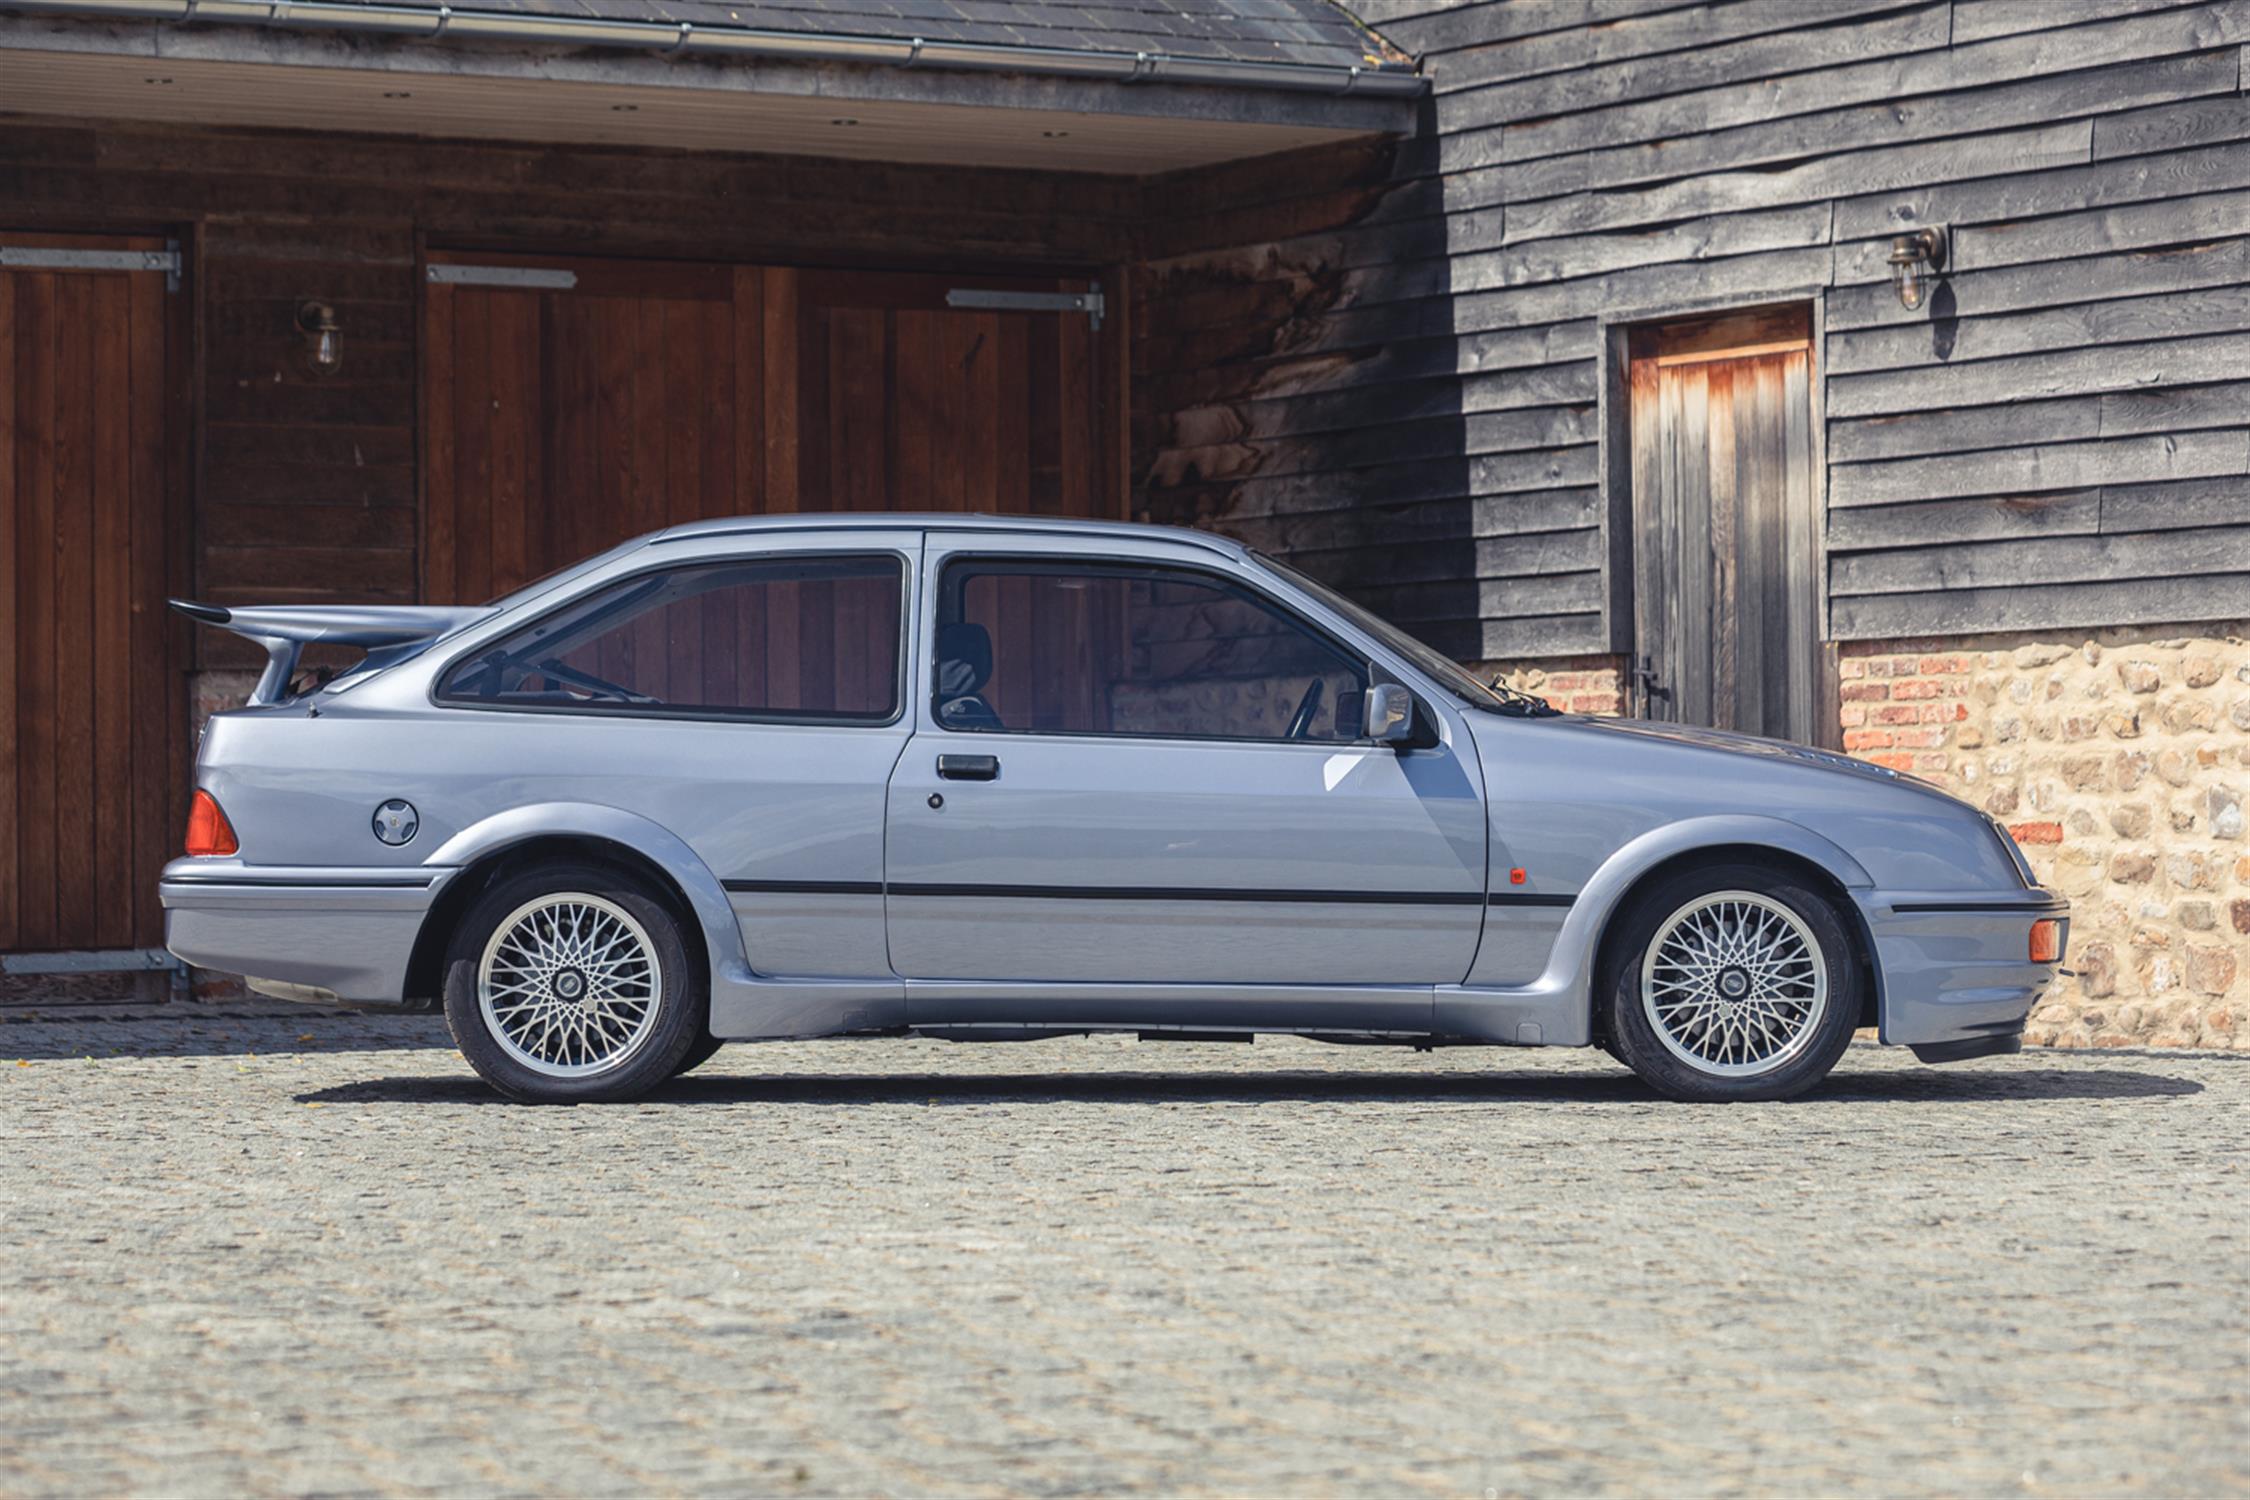 1986 Ford Sierra RS Cosworth - Image 3 of 3